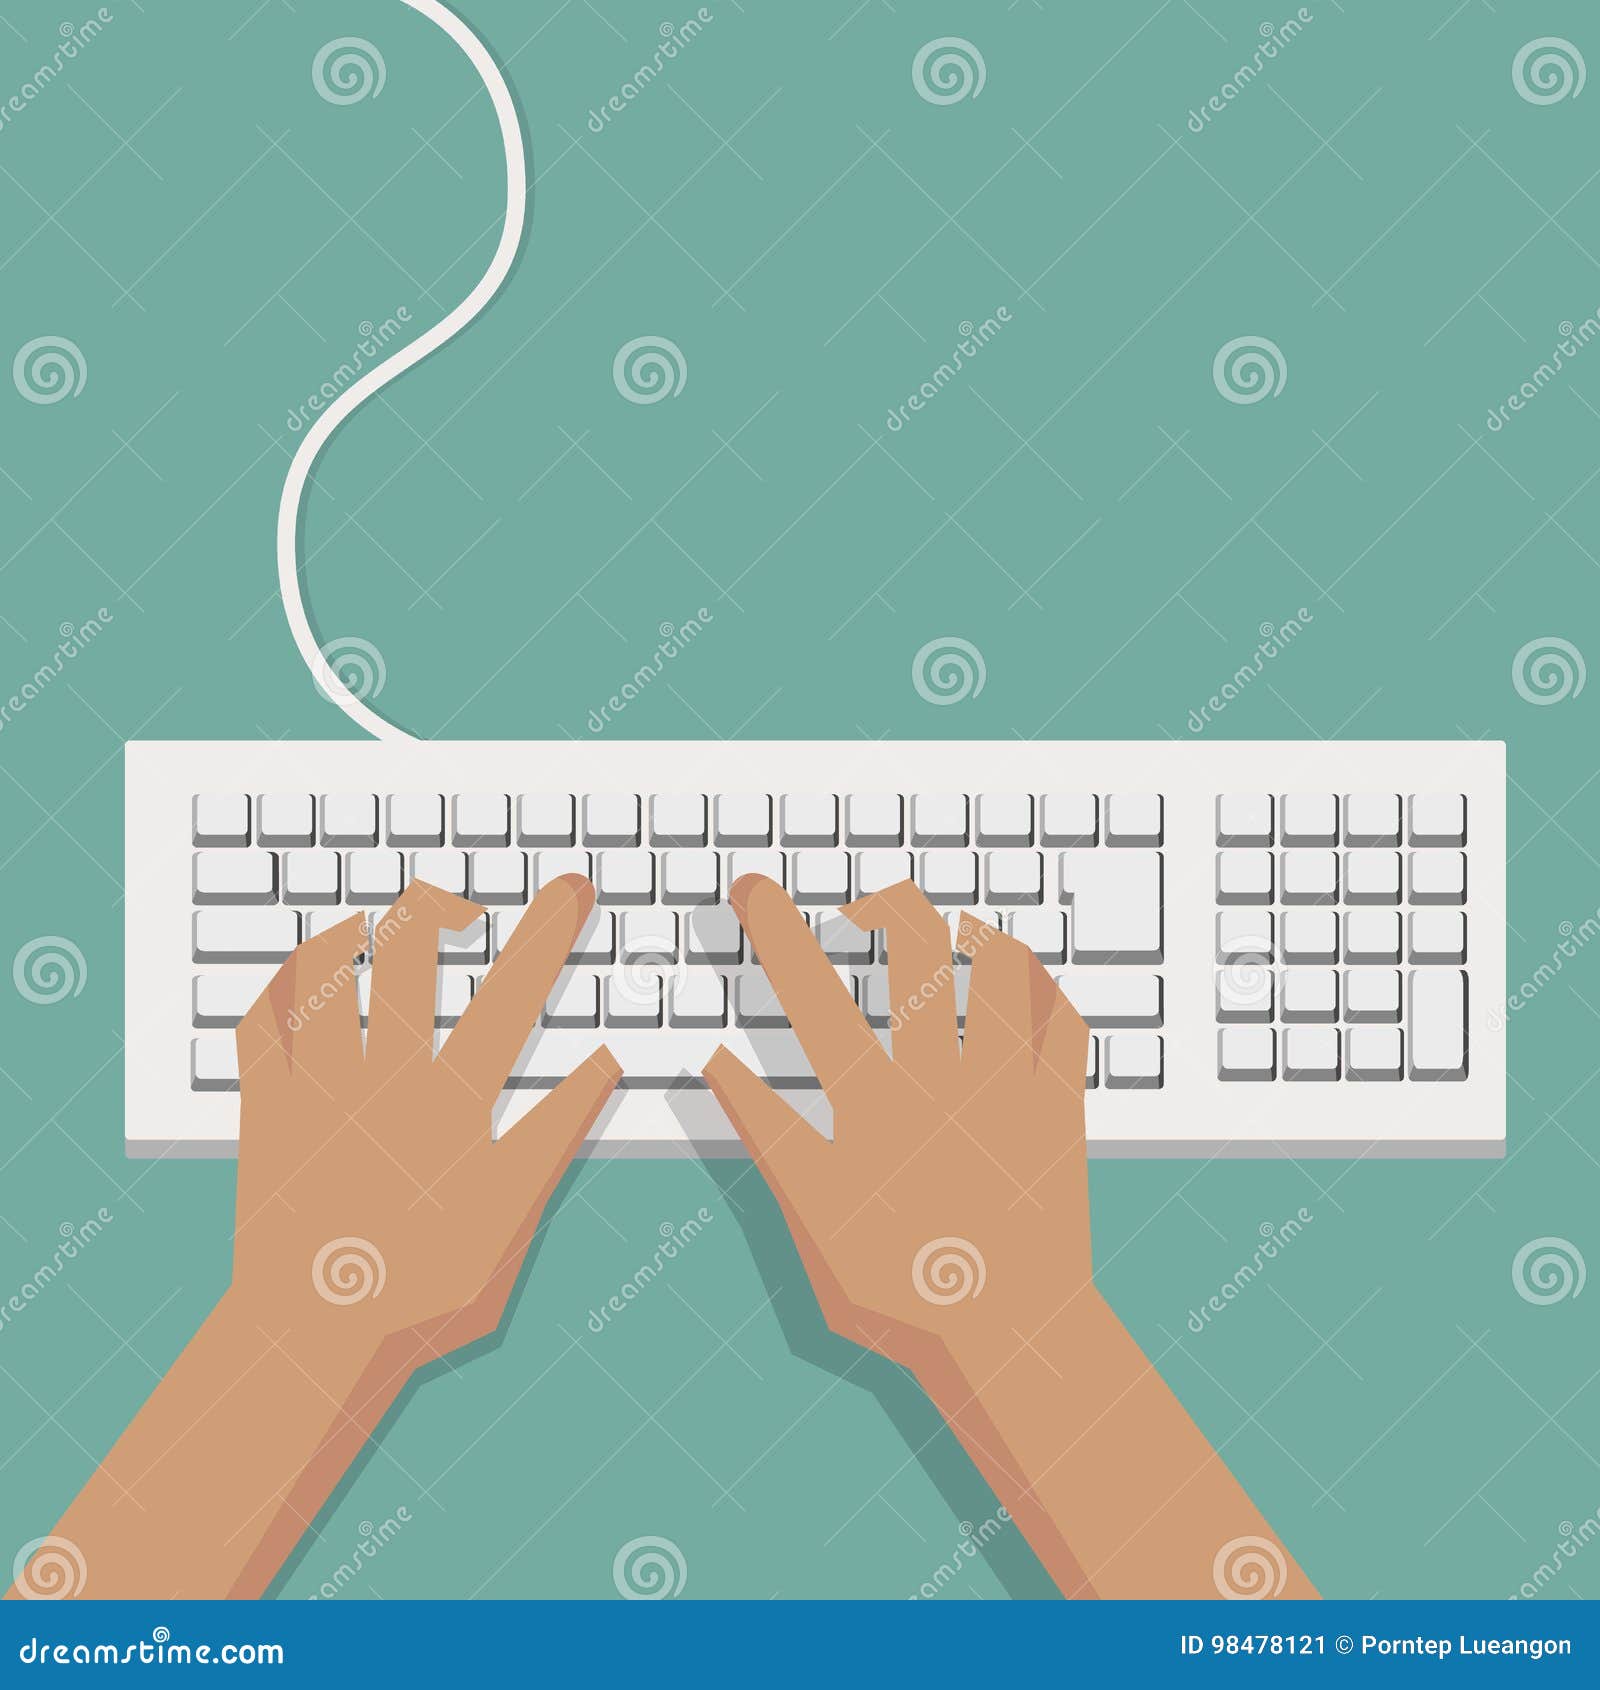 flat hands typing on white keyboard with cable